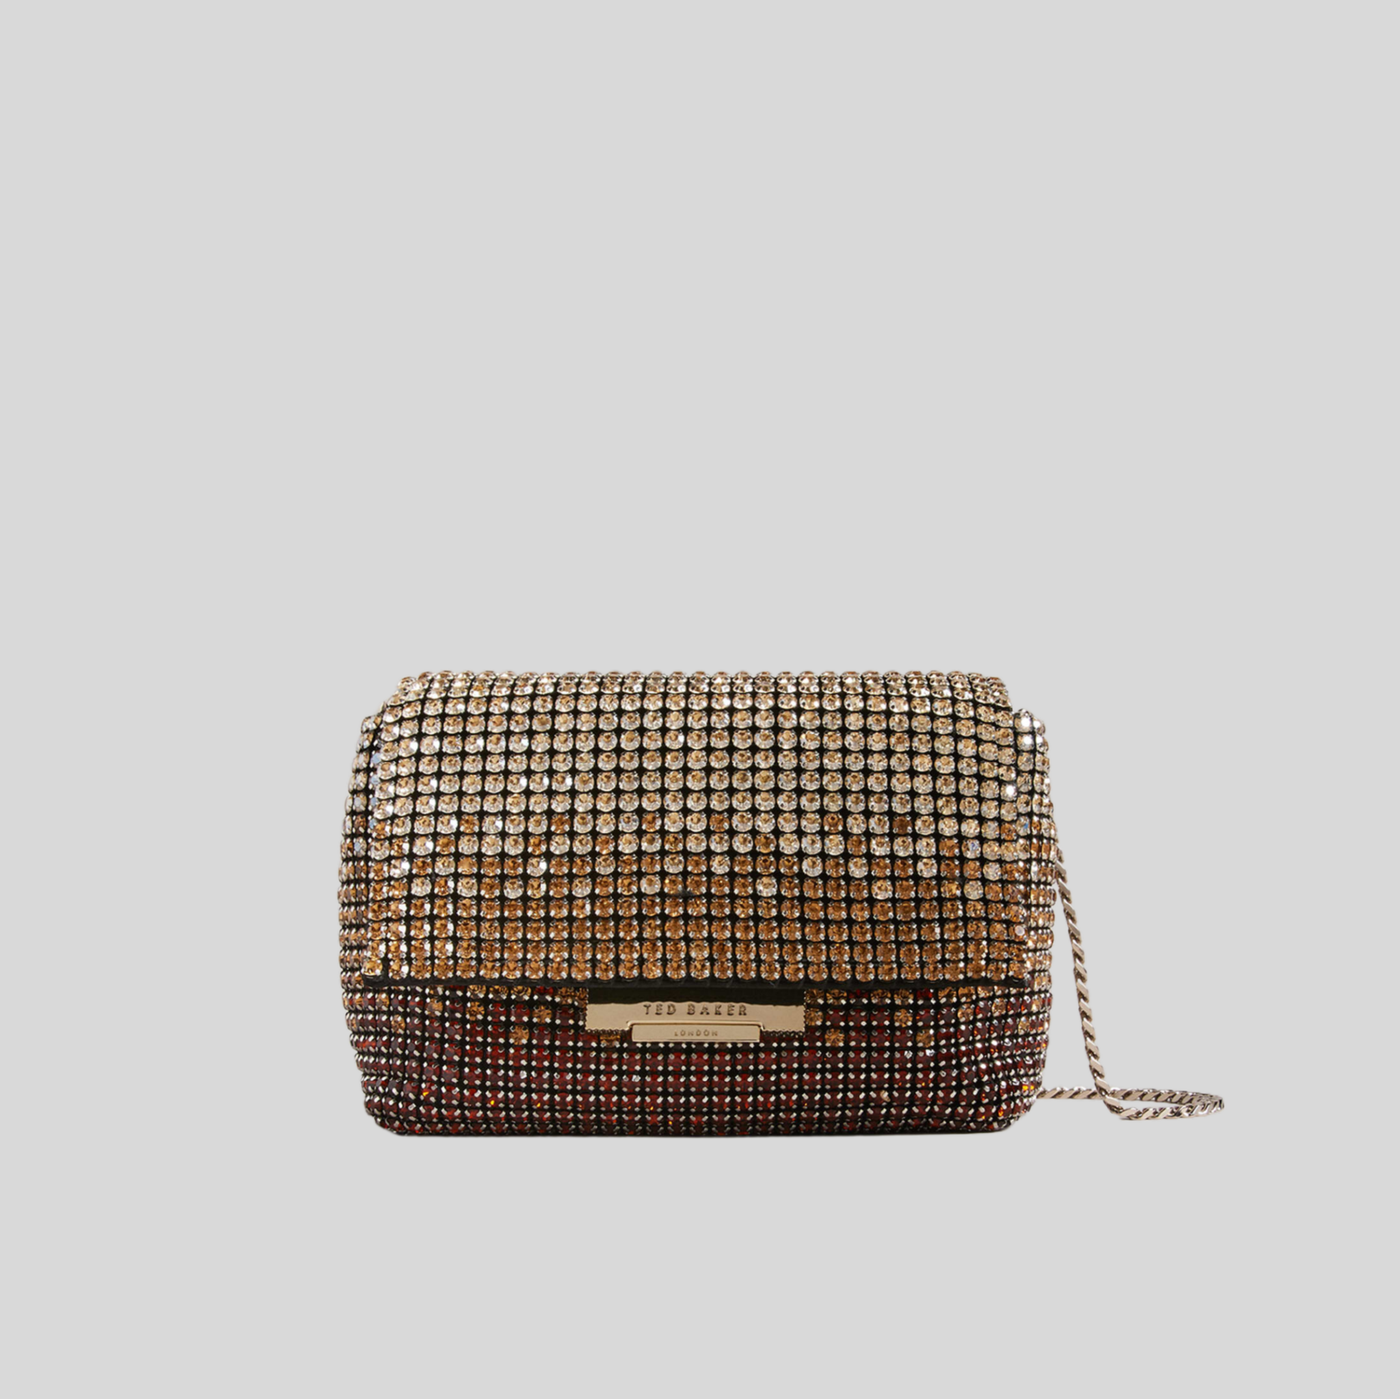 Gotstyle Fashion - Ted Baker Bags Crystal Embellished Mini Cross Body Bag - Brown